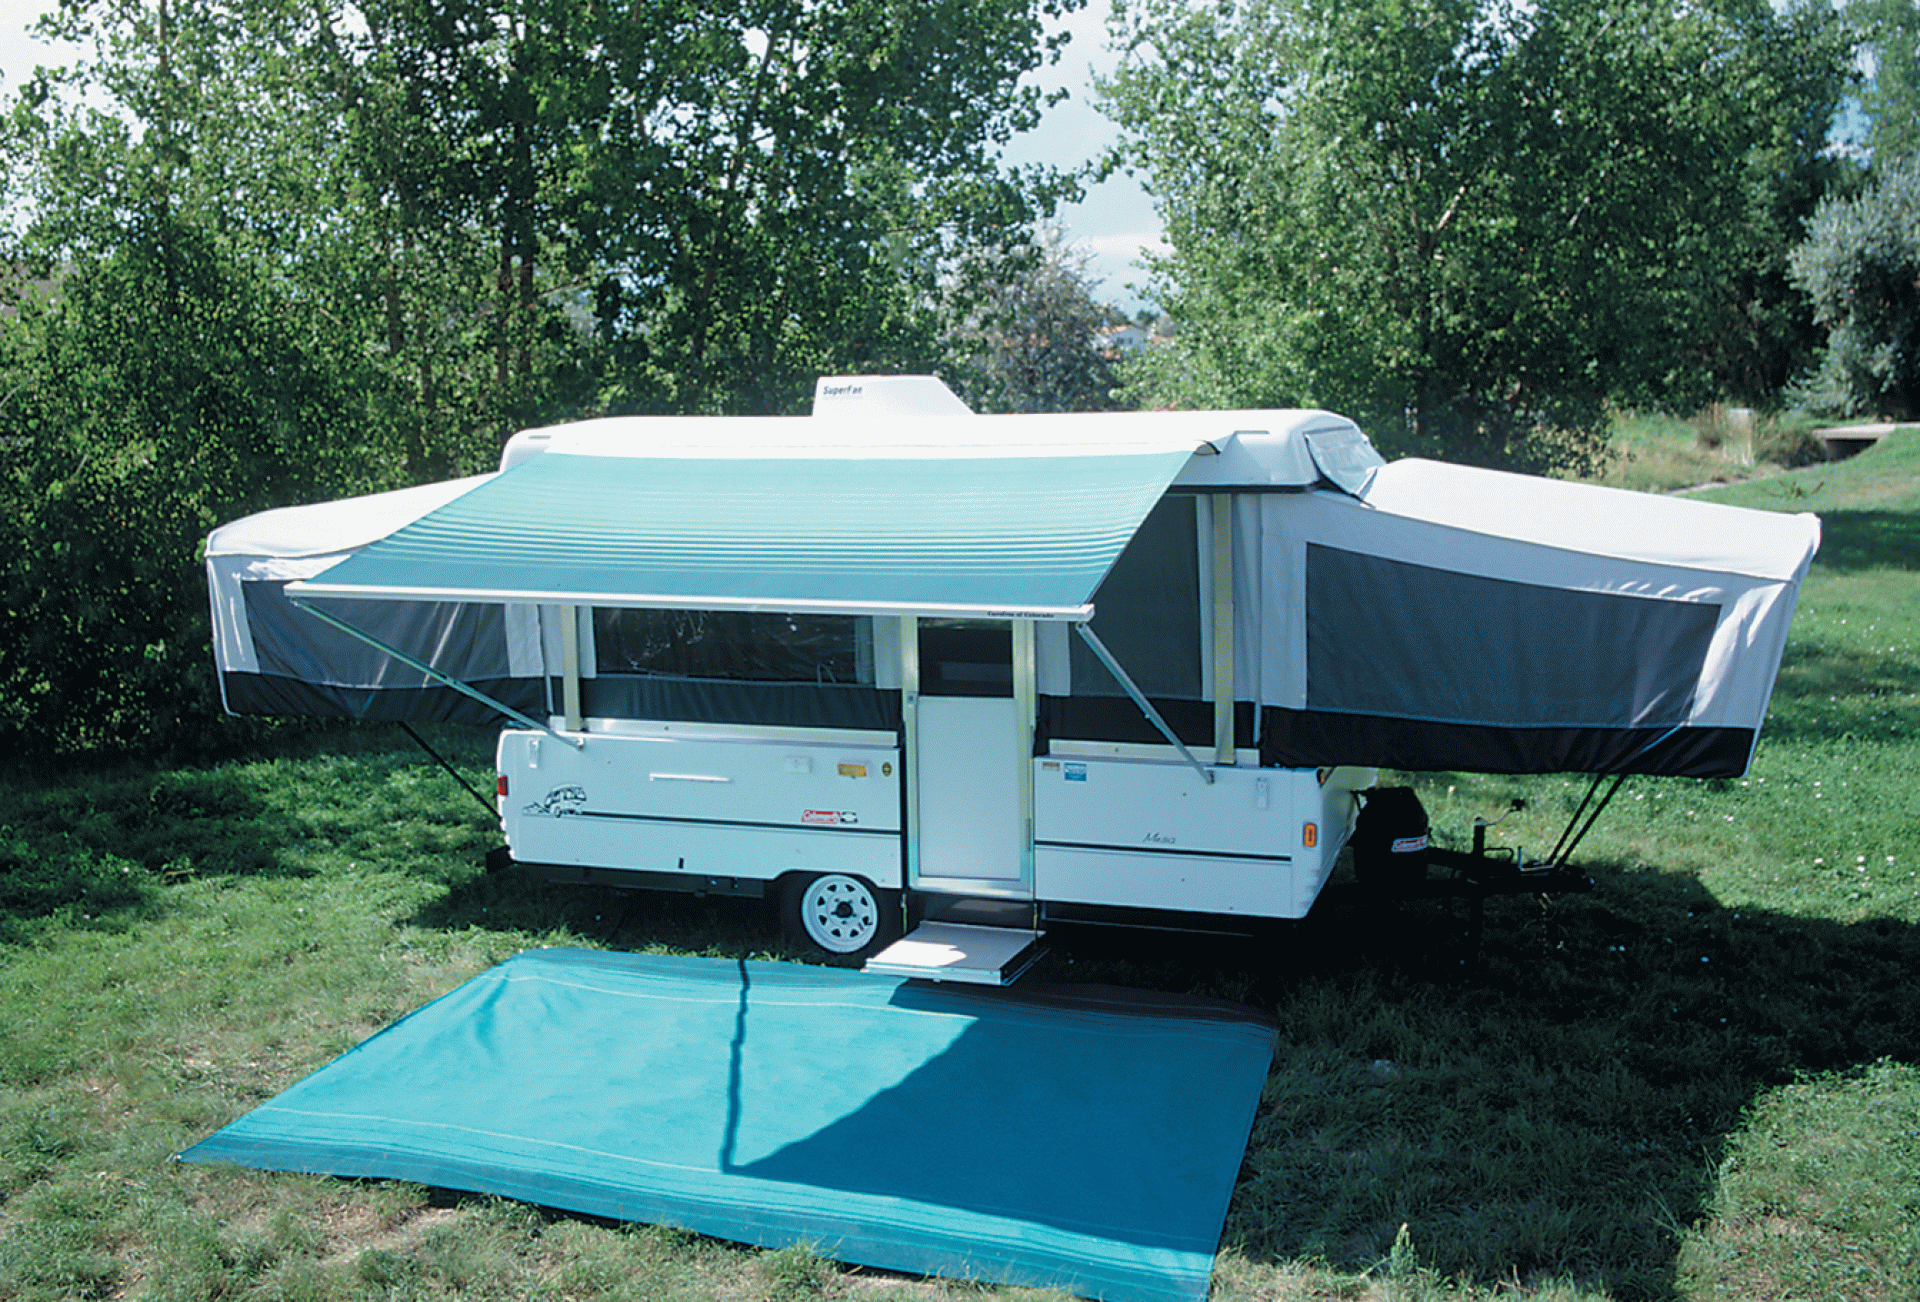 CAREFREE OF COLORADO | 981388C00 | Campout Awning Metric 3.5 Metric 11' 6" Teal Dune Stripe with White Bag